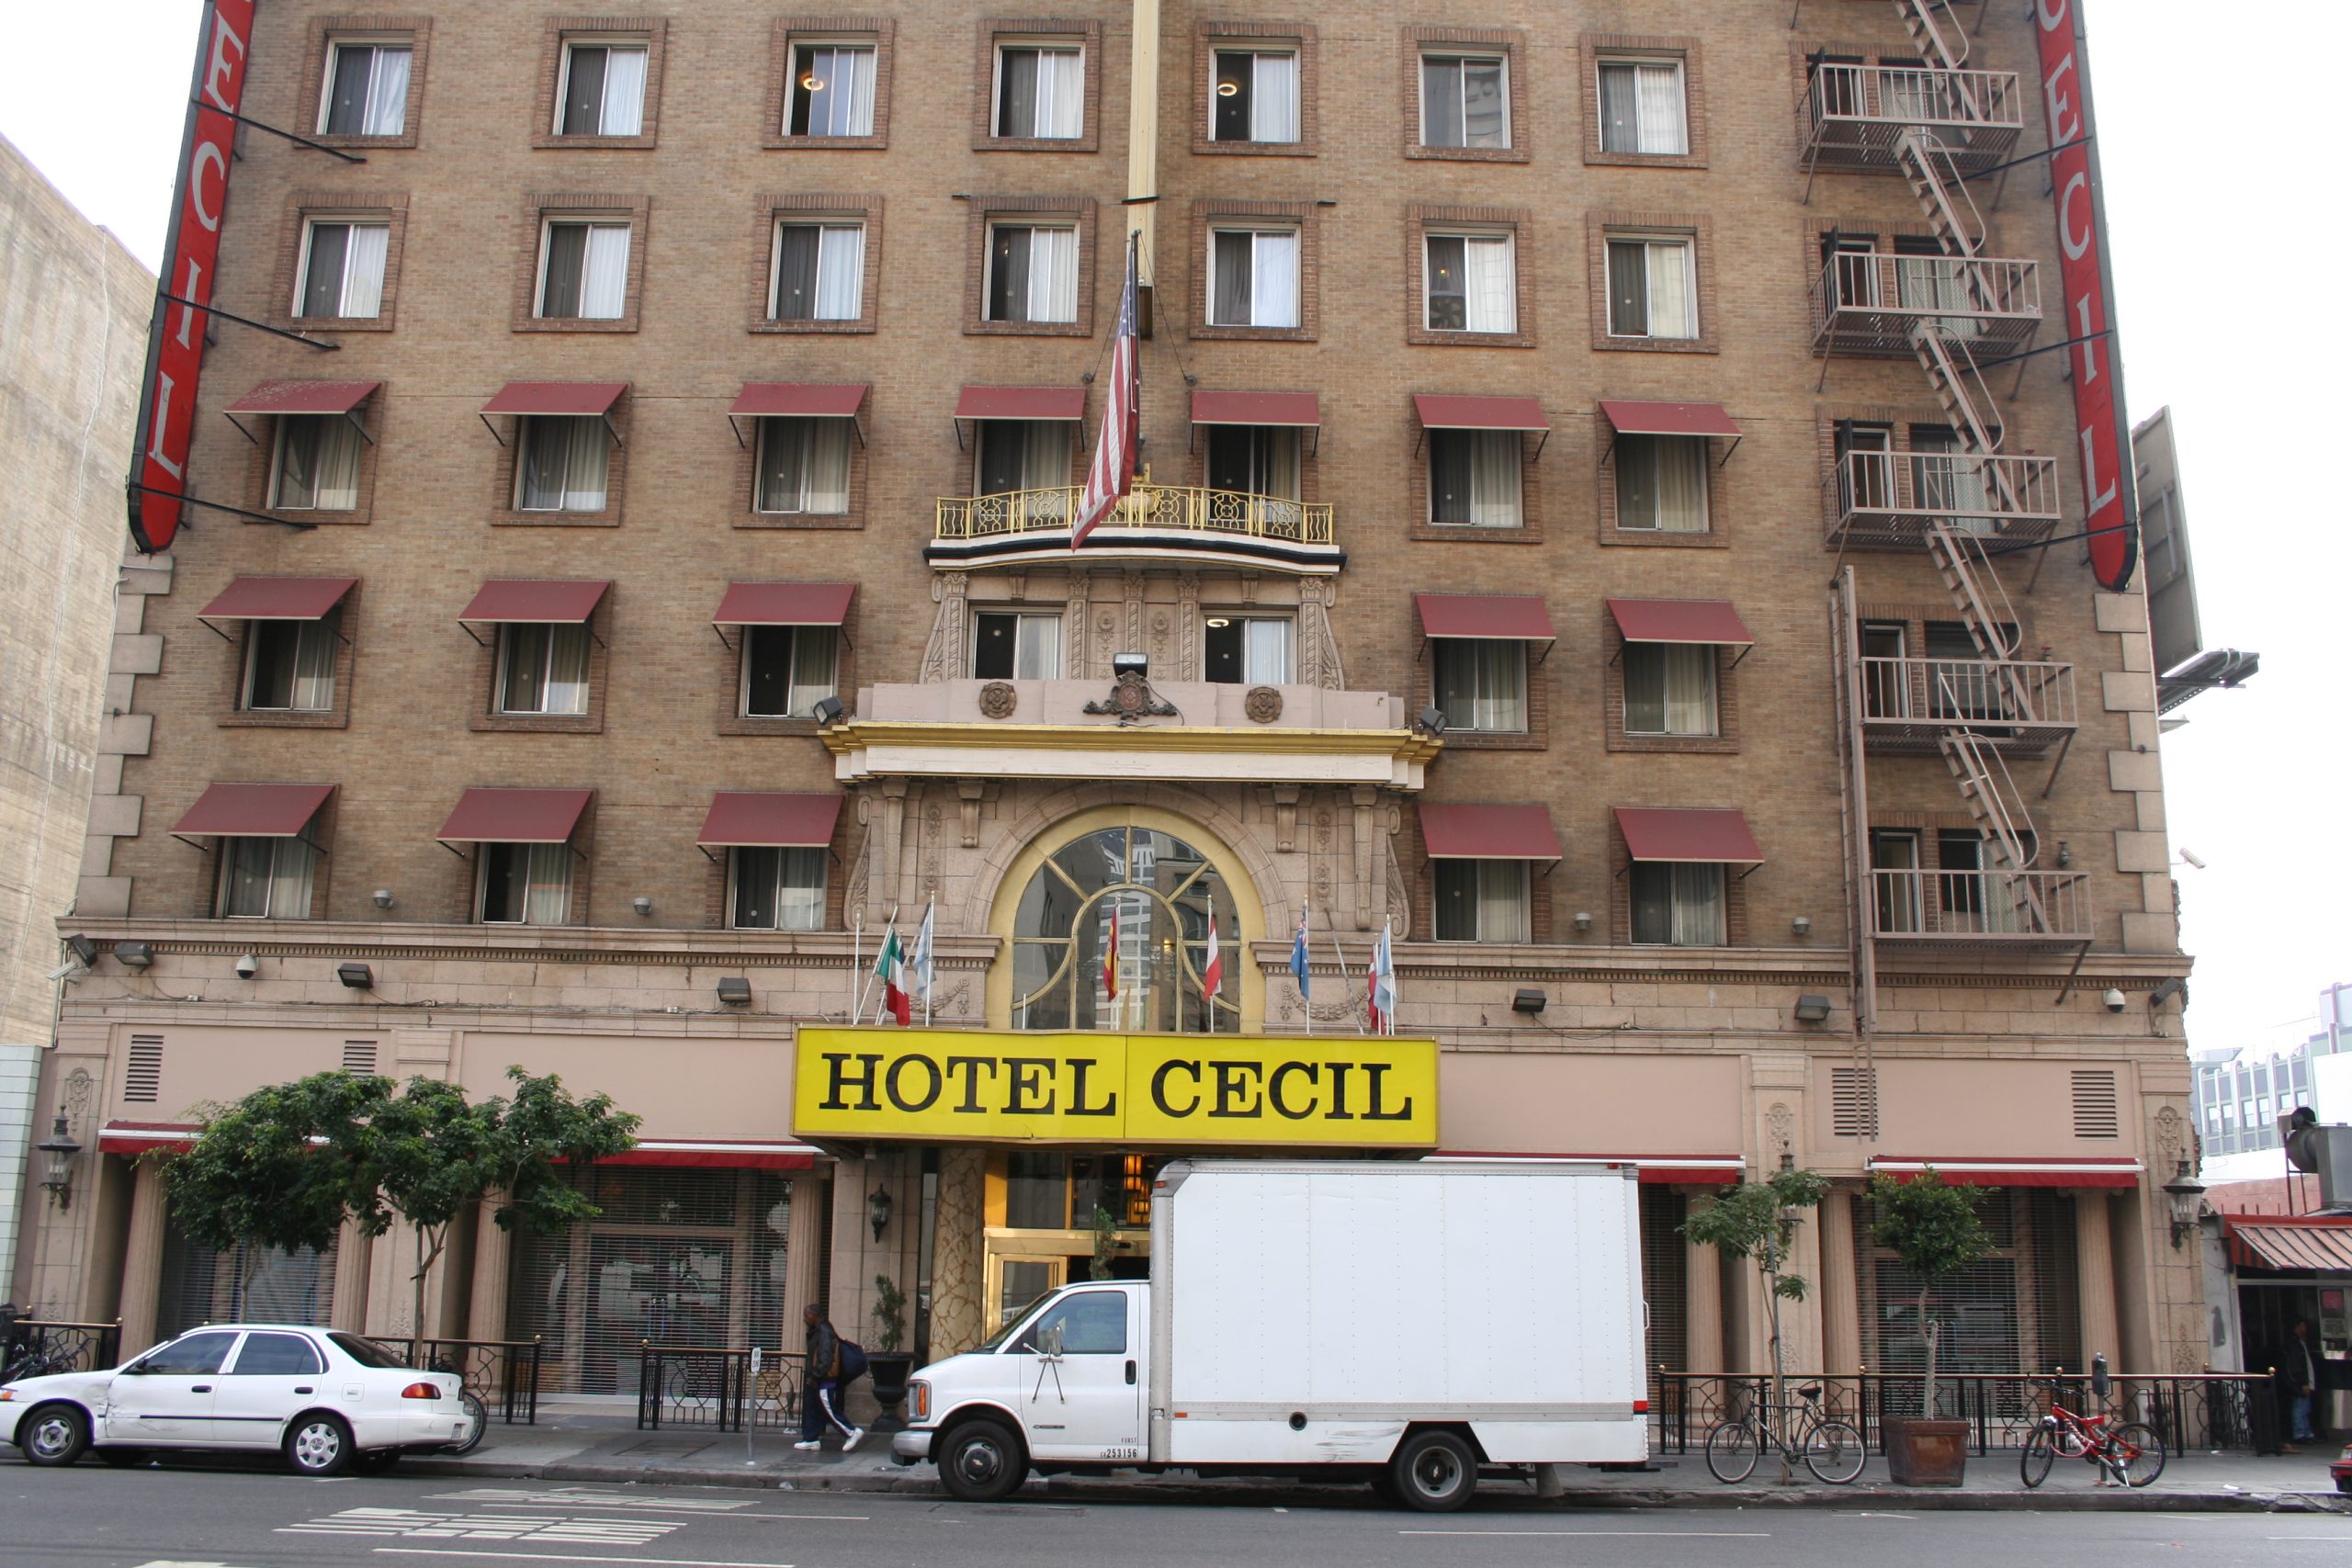 where is the cecil hotel